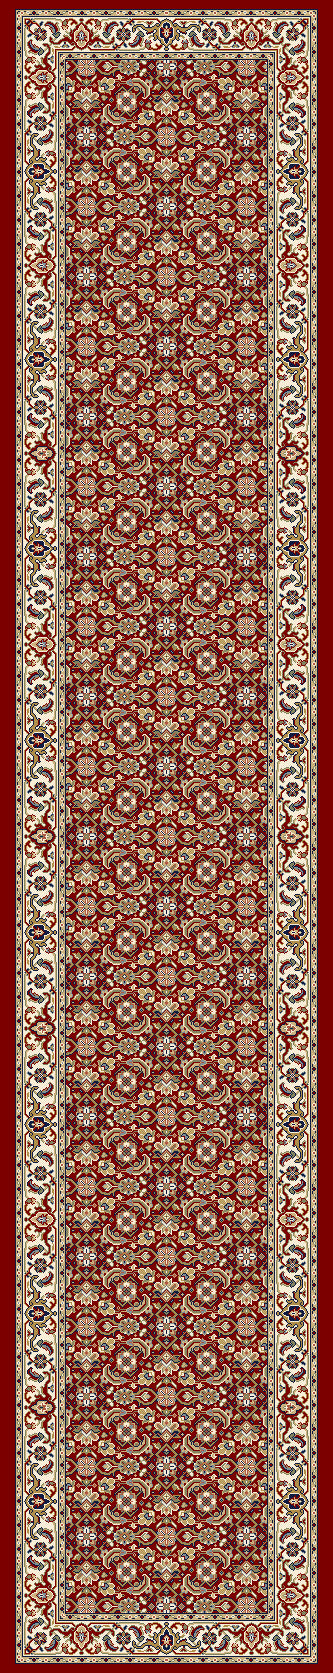 Dynamic Rugs ANCIENT GARDEN 57011 Red/Ivory Area Rug